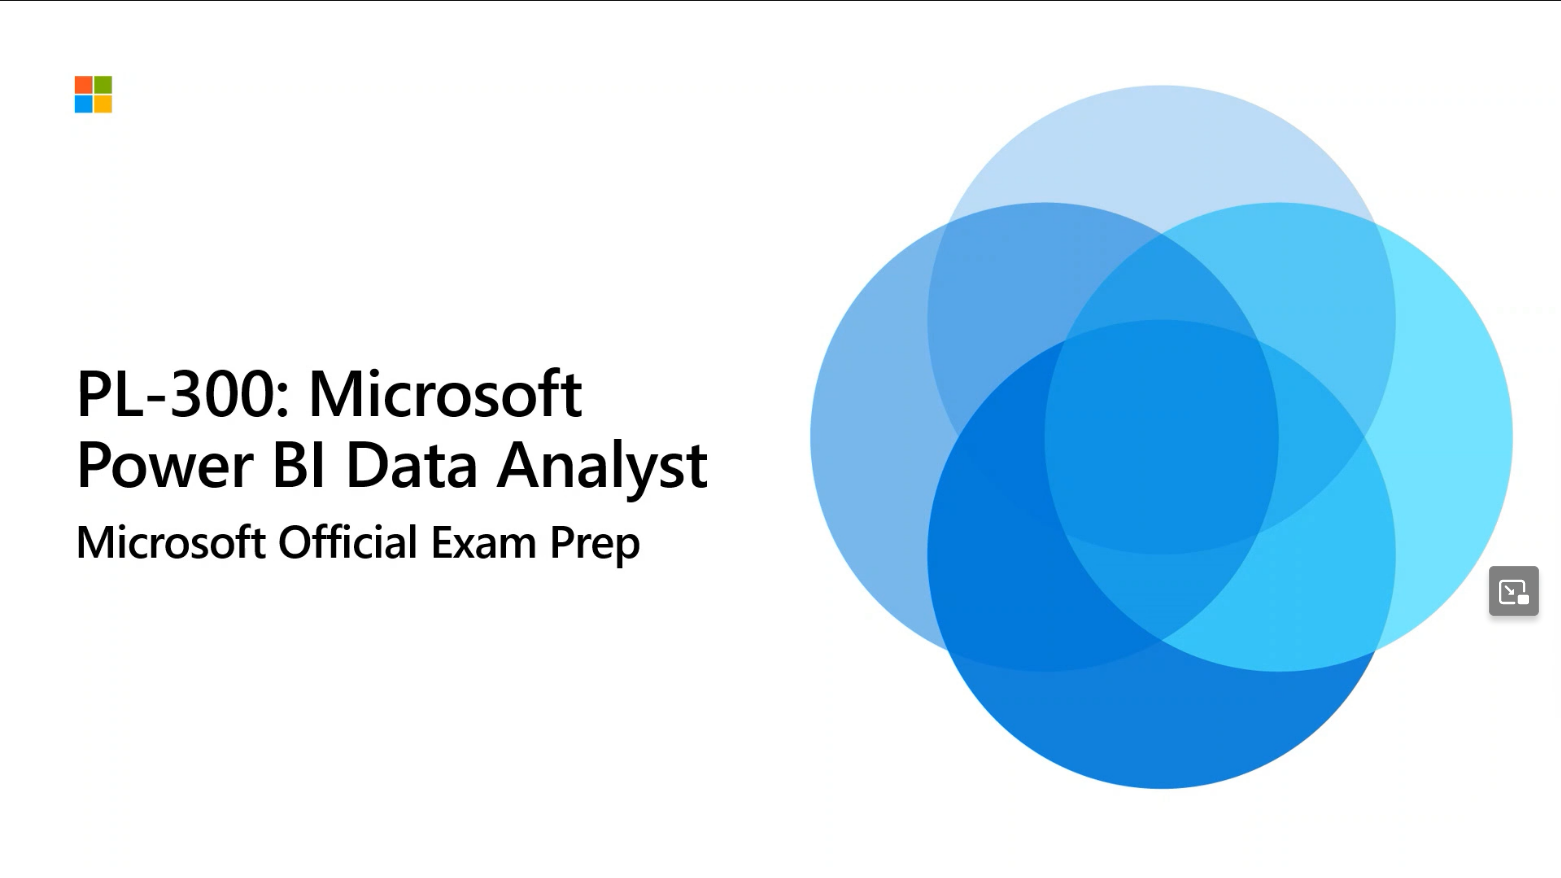 How enterprise data analysts can apply for Microsoft Power BI certification